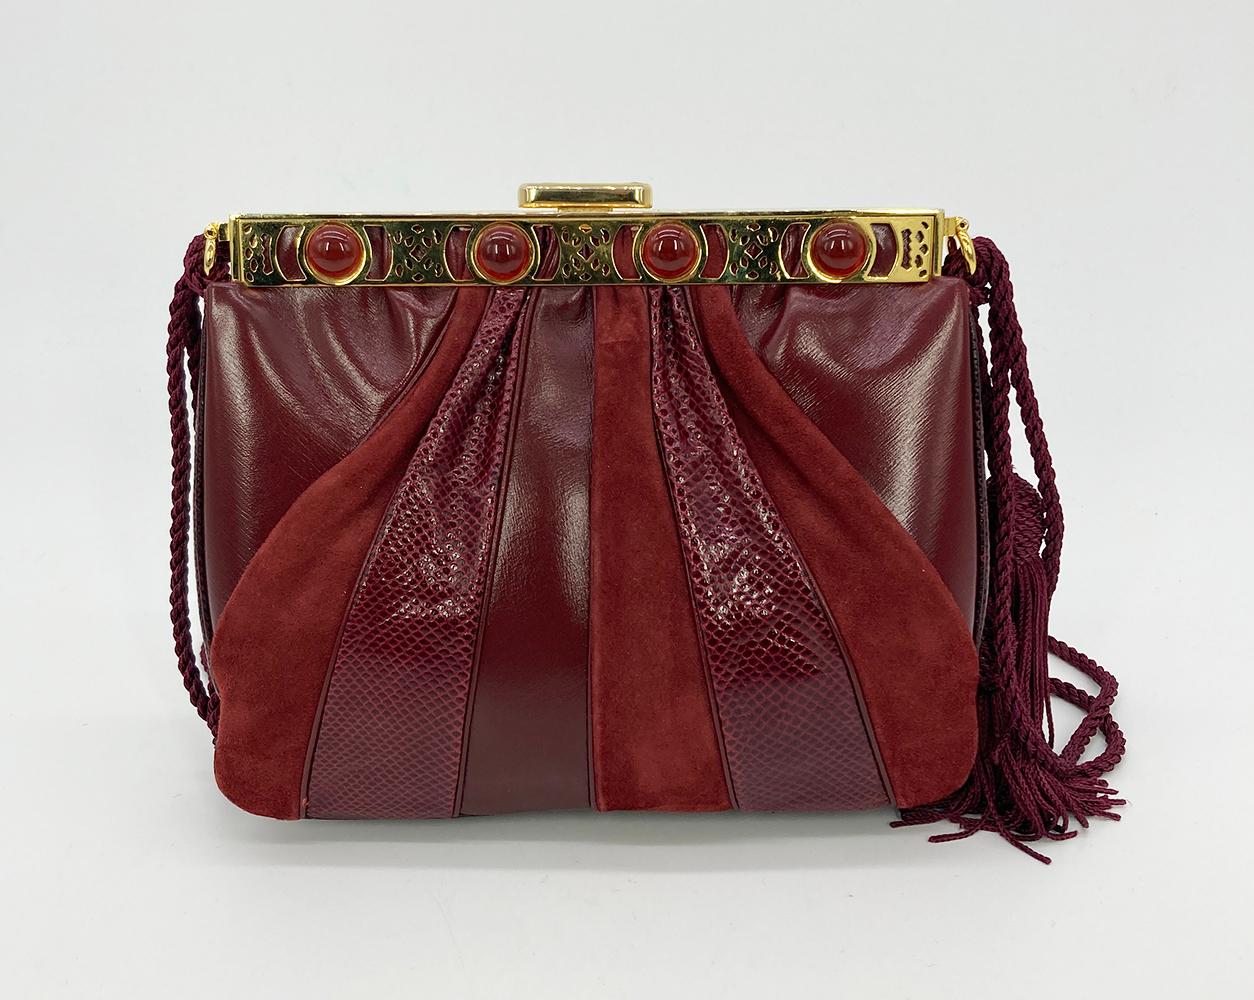 Judith Leiber Maroon Leather Suede and Lizard Tassel Strap Shoulder Bag in excellent condition. Unique tri leather exterior with maroon smooth calfskin, suede and lizard leathers trimmed with gold hardware and red gemstones along top edge. Silk cord